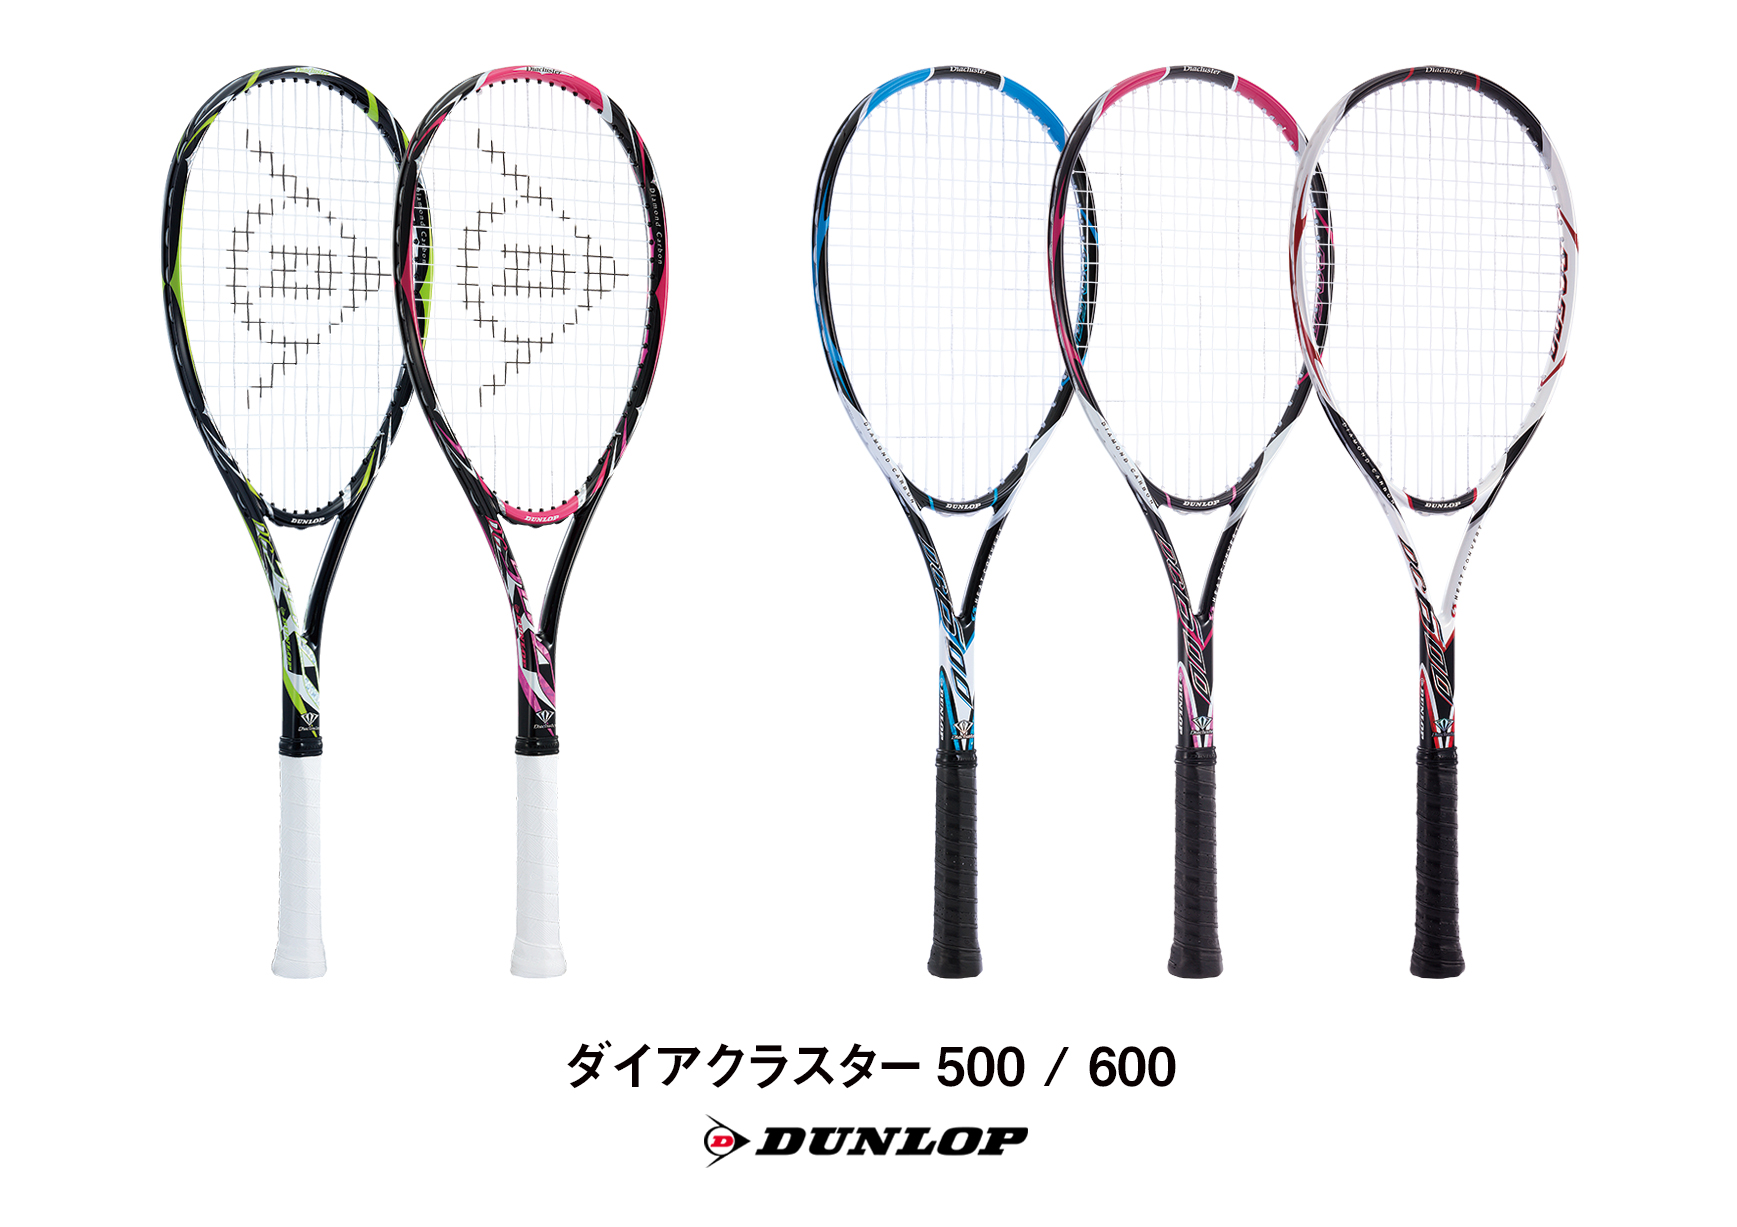 237] DUNLOP DiaCluster 300S テニスラケット - ラケット(軟式用)